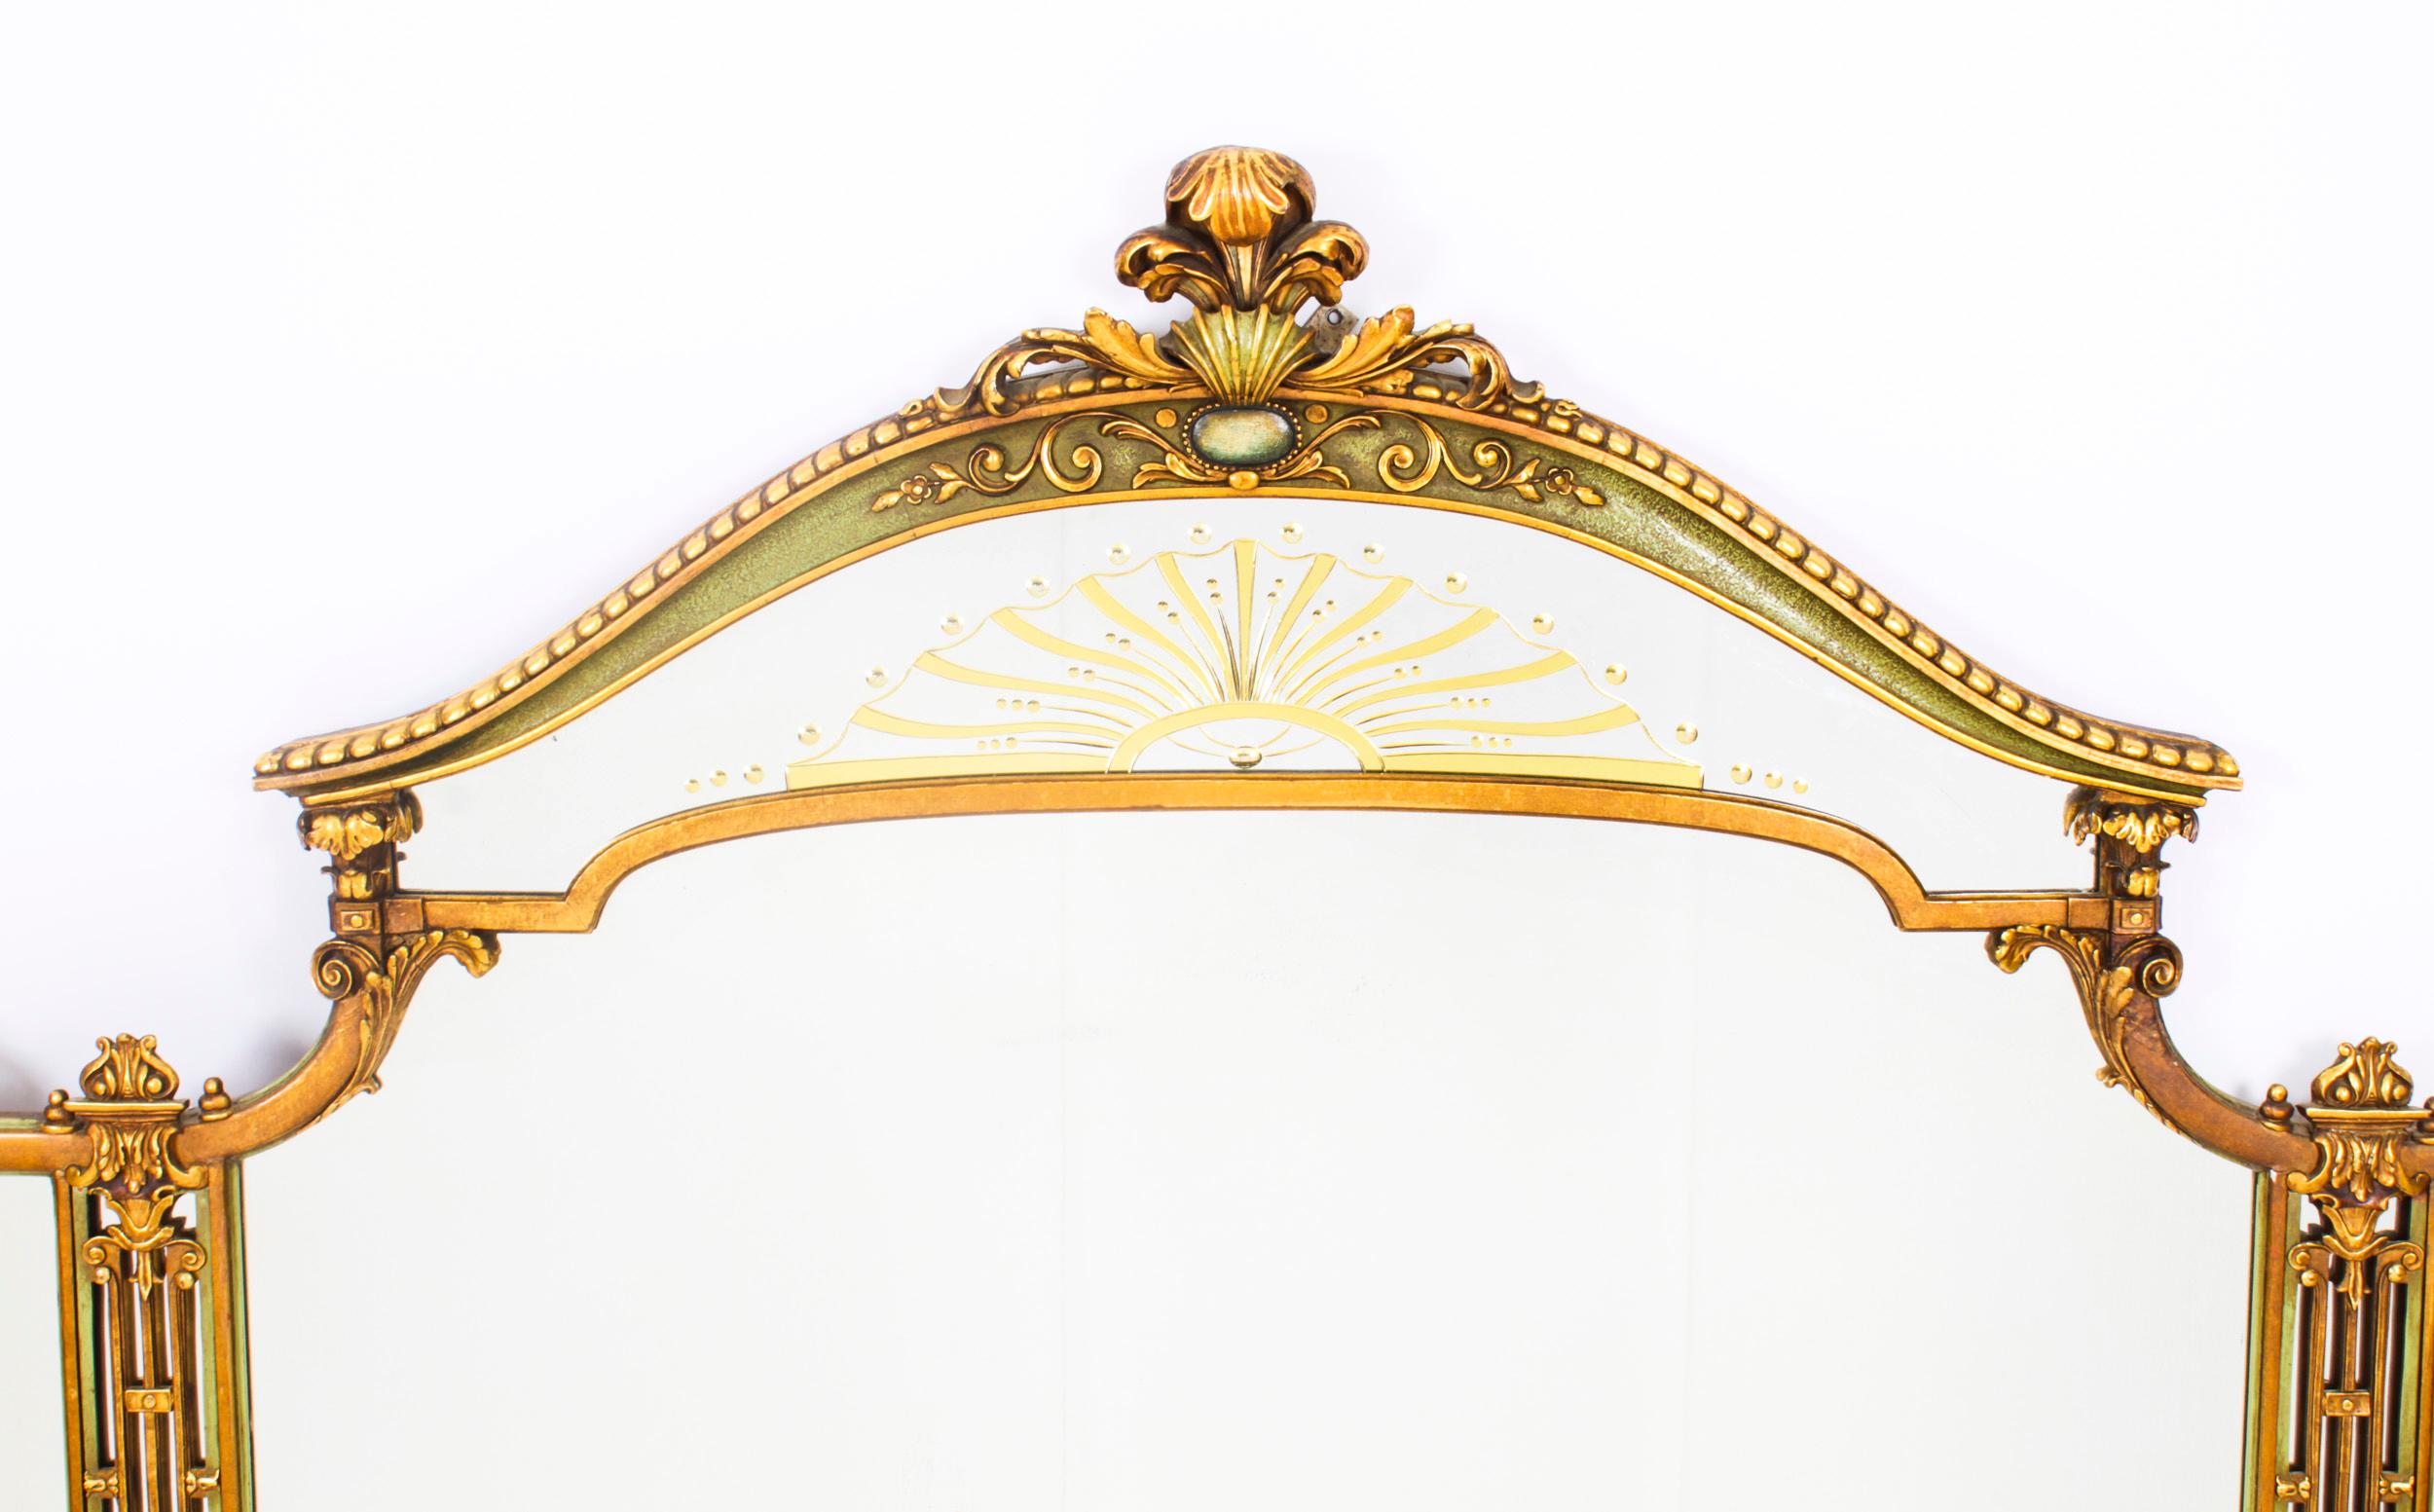 This is a beautiful large antique English Art Deco overmantle mirror, Circa 1920 in date.

The elaborately shaped mirror features a finely carved gilded frame hand painted with flowers. It is surmounted with a beautifully carved acanthus crest and